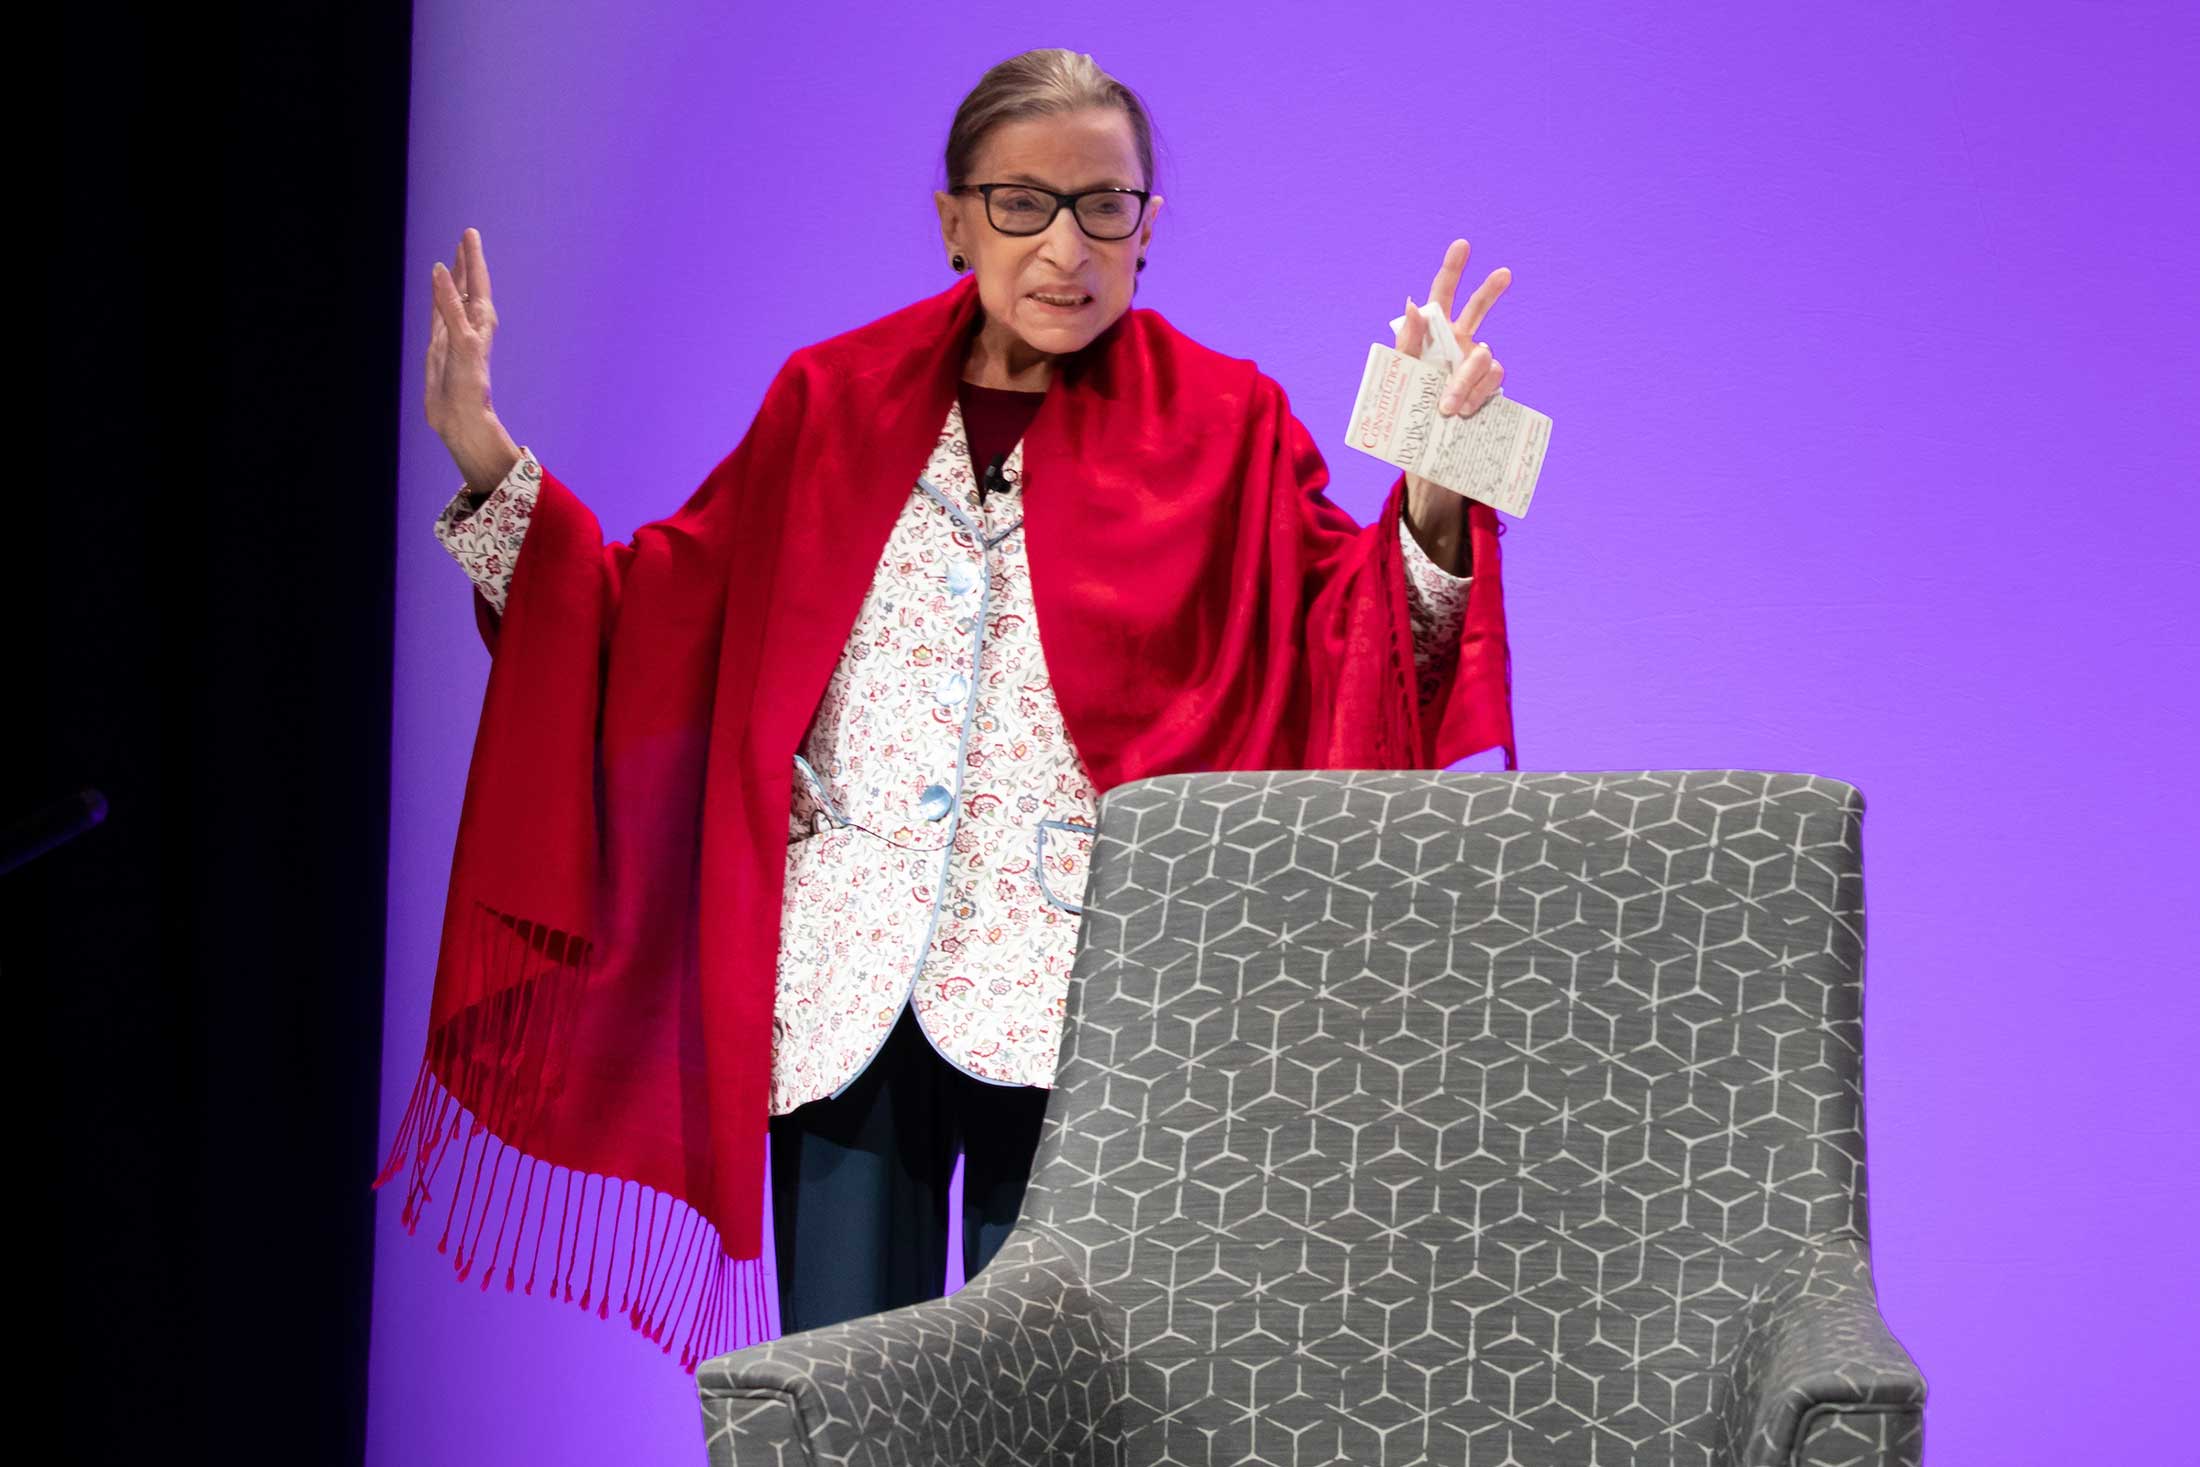 Justice Ruth Bader Ginsburg waving to the audience